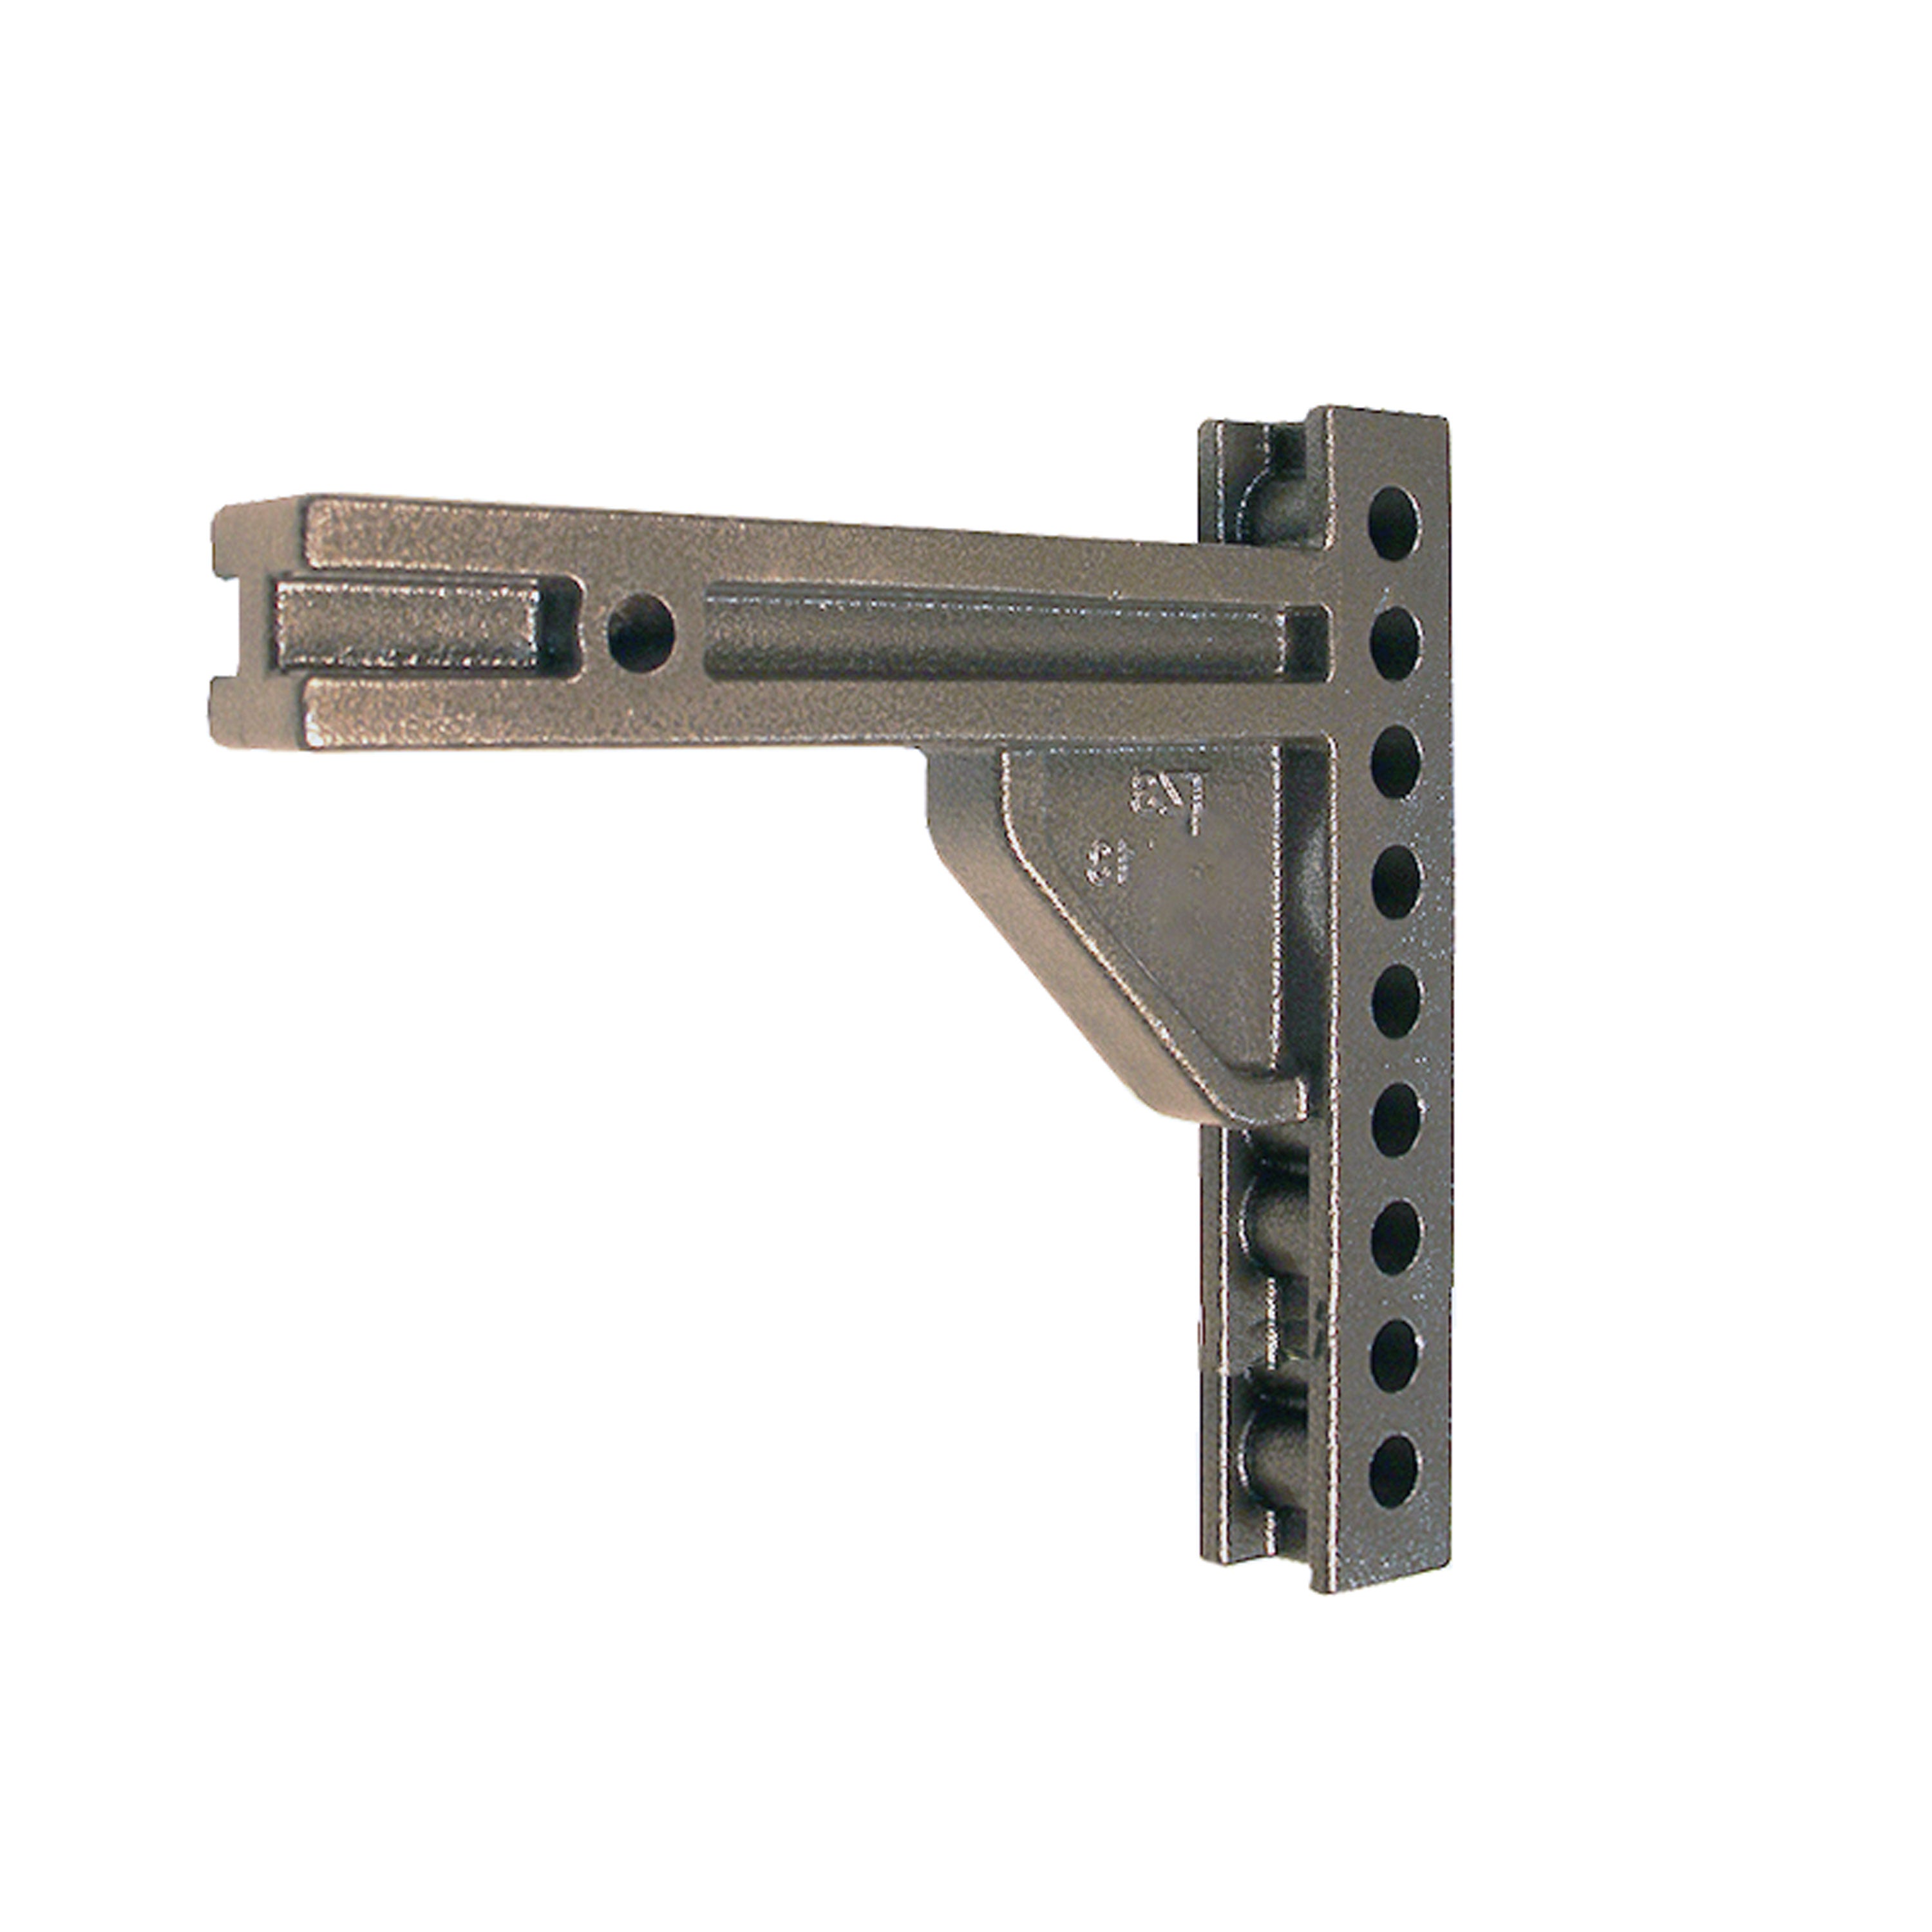 Blue Ox BXW0356 SwayPro Weight Distributing Hitch with 11 Hole Shank - 350 lb. TW